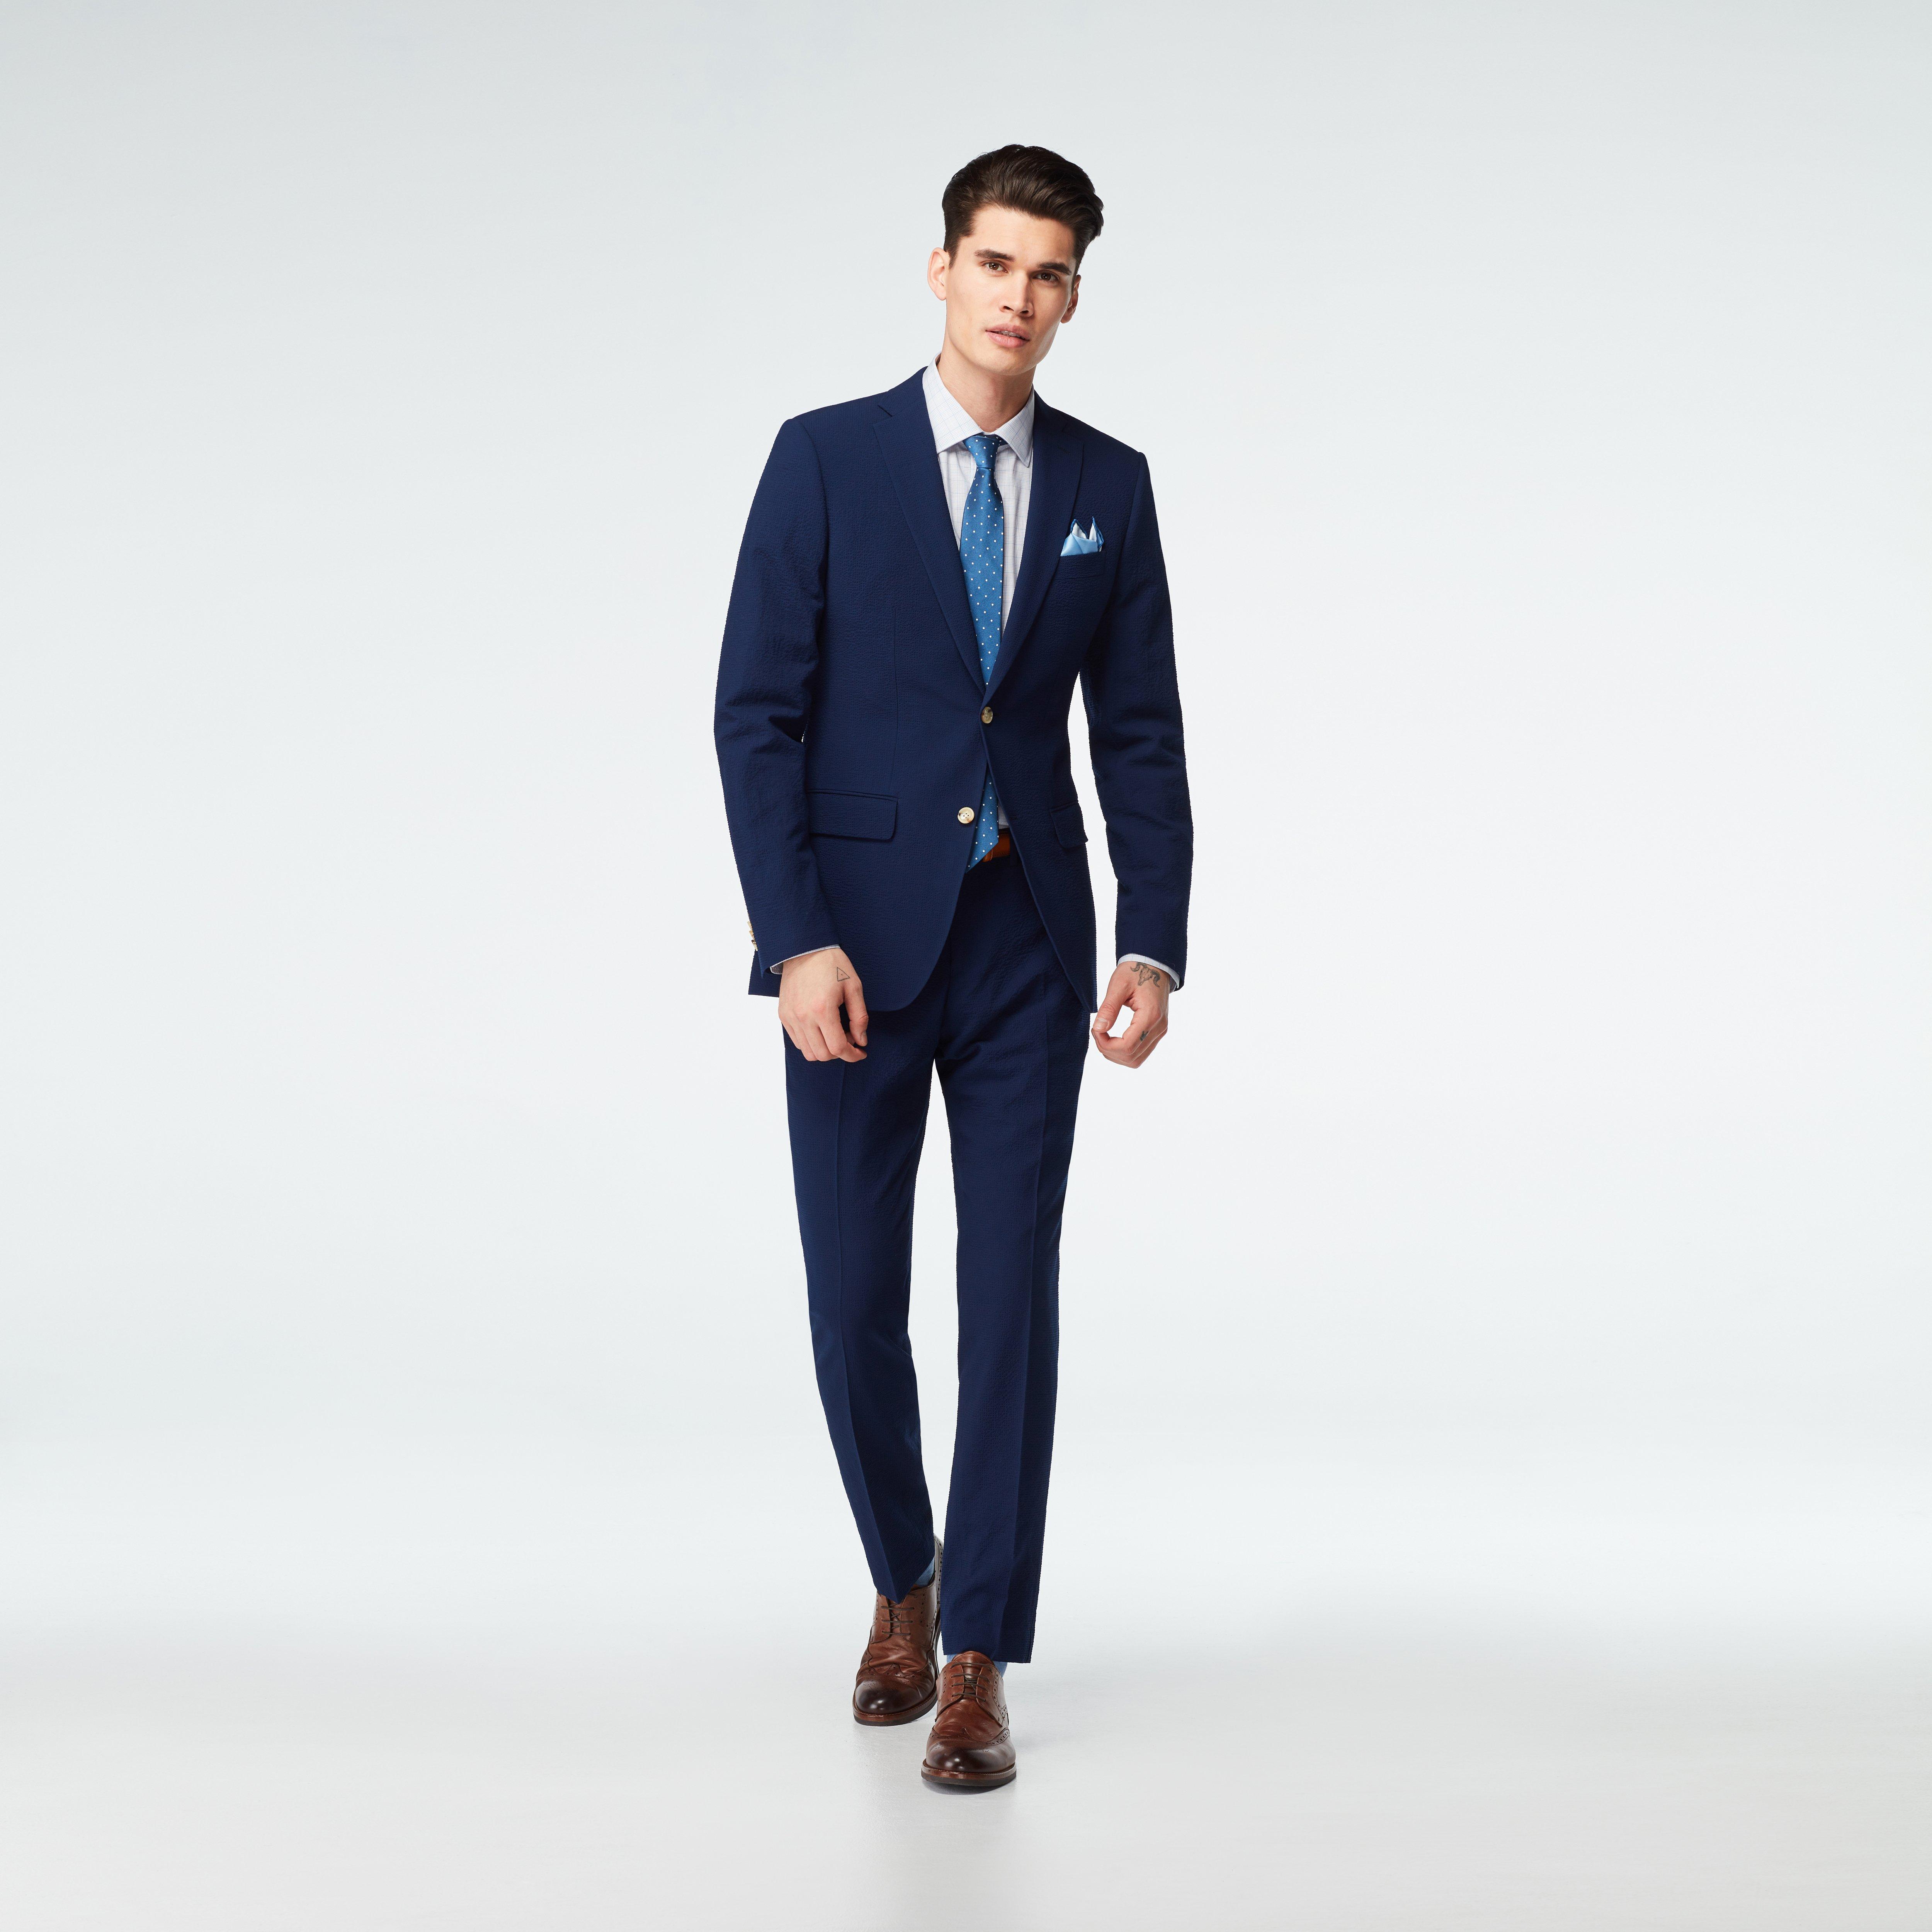 Custom Suits Made For You - Stapleford Seersucker Navy Suit | INDOCHINO